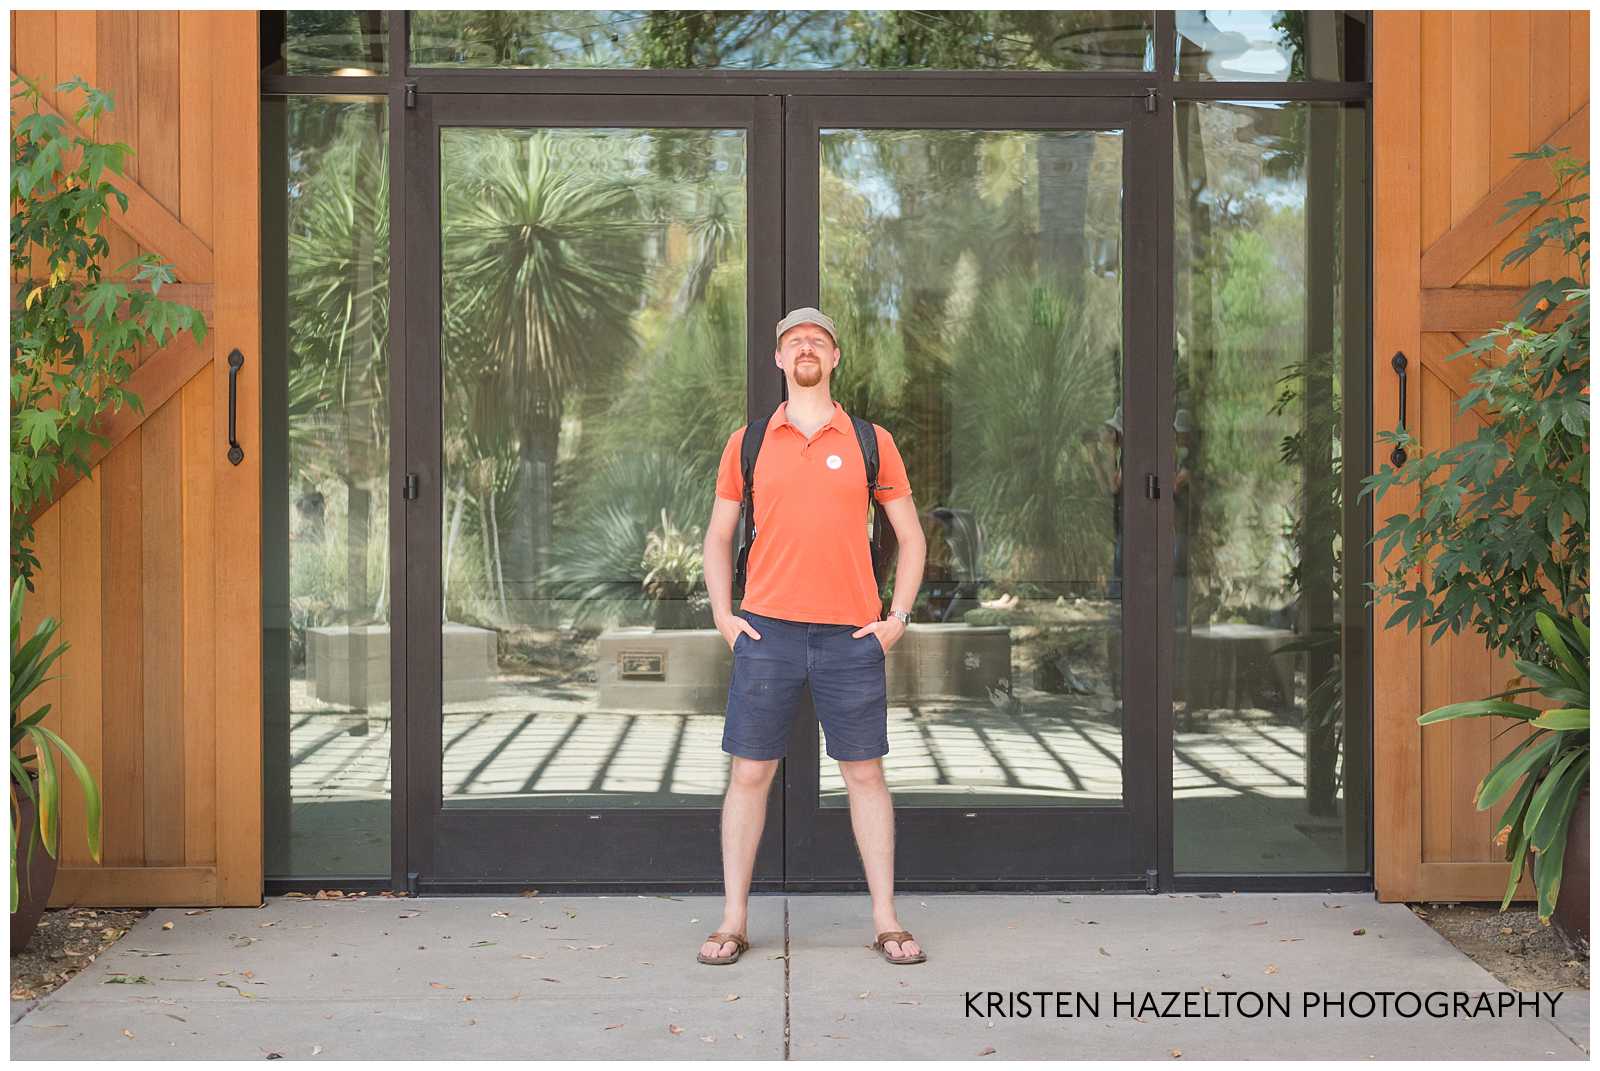 Man in orange shirt standing in front of two glass doors at the Ruth Bancroft Garden